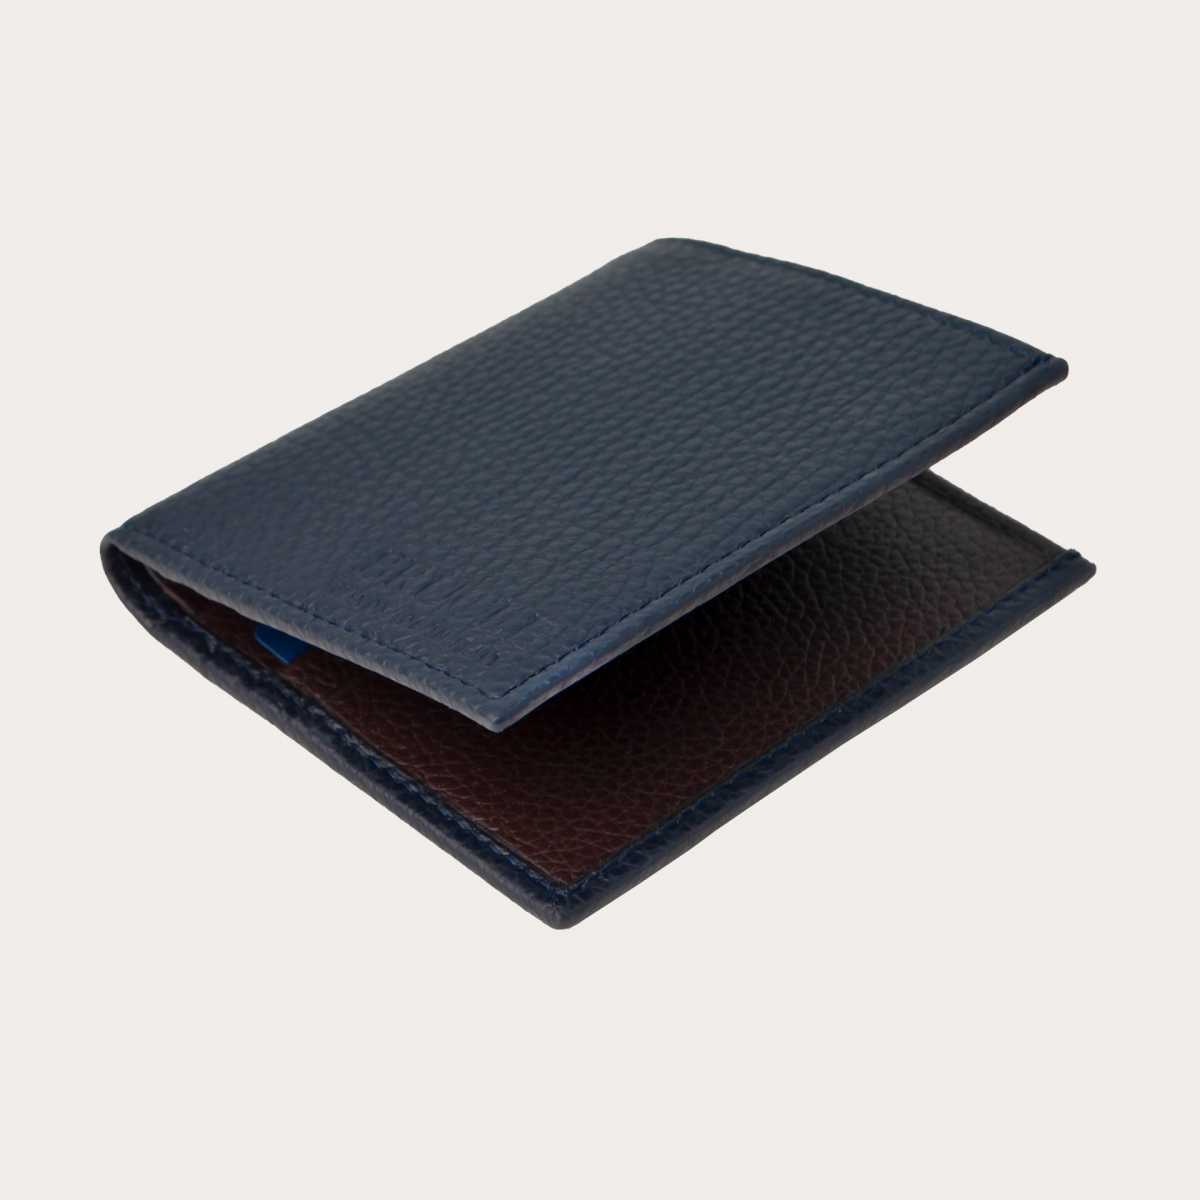 BRUCLE Compact business wallet in tumbled leather, navy blue